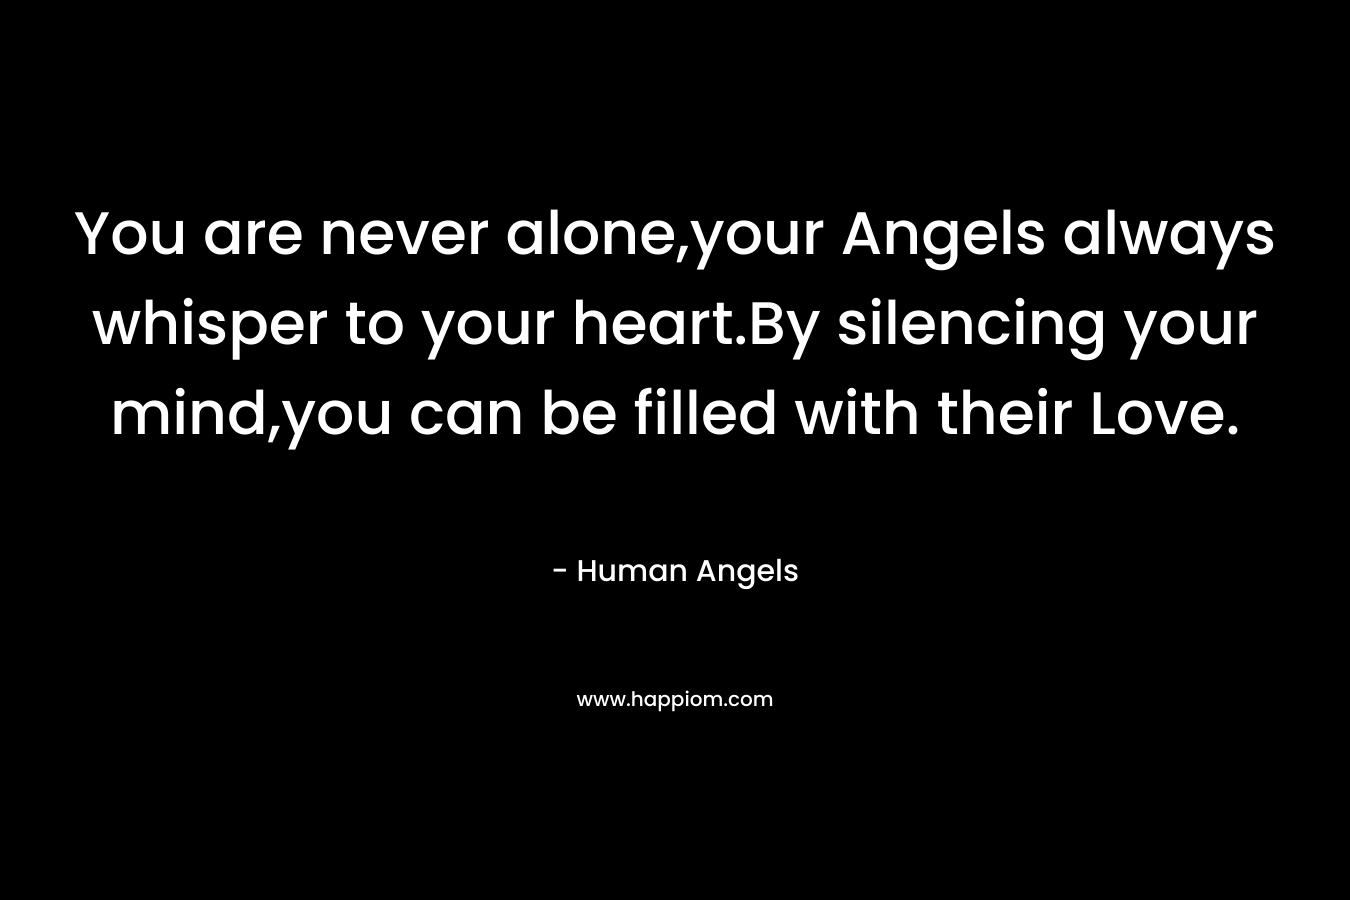 You are never alone,your Angels always whisper to your heart.By silencing your mind,you can be filled with their Love. – Human Angels